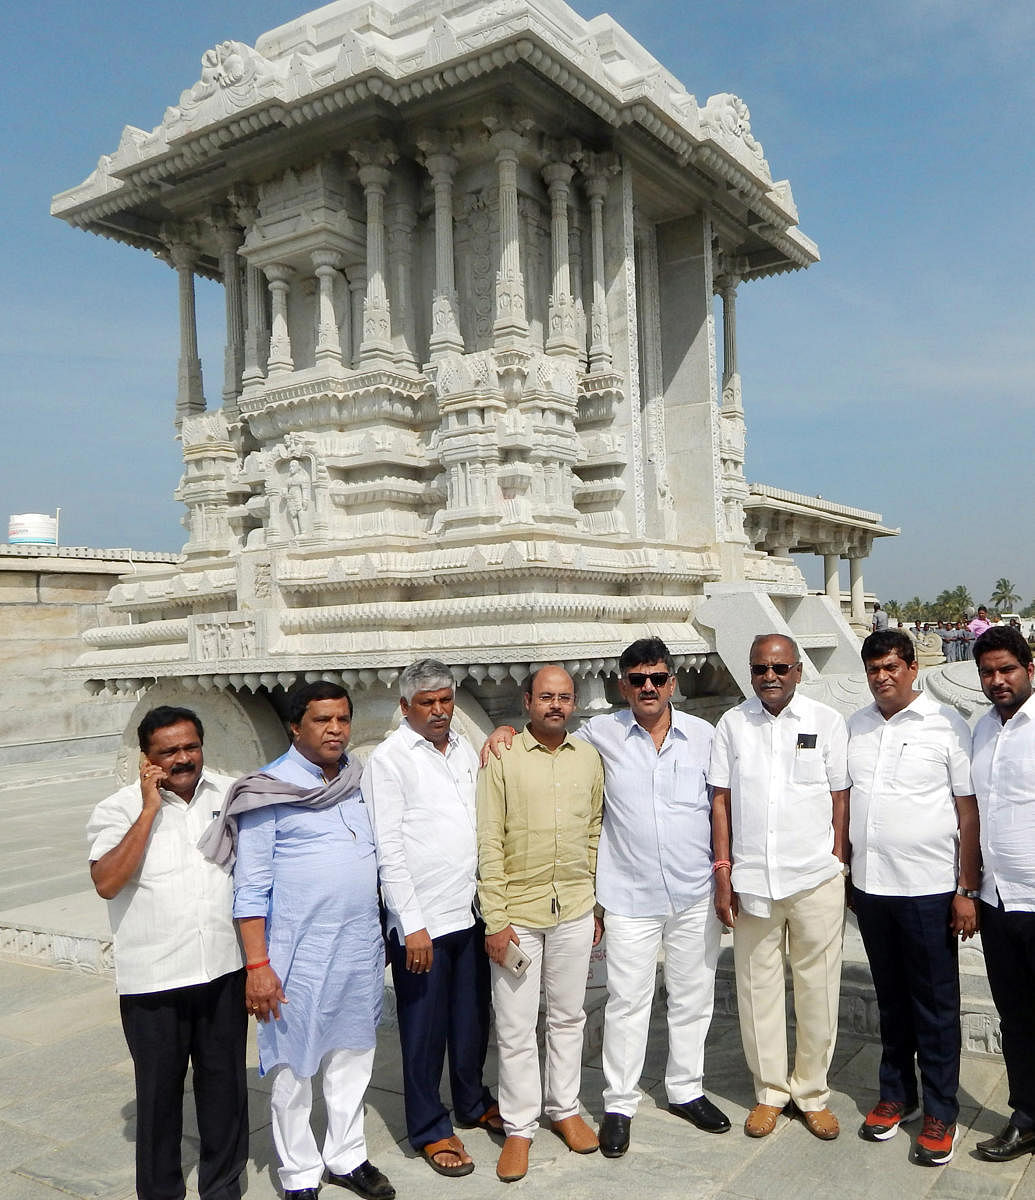 Water Resources Minister D K Shivakumar, Minor Irrigation Minister C S Puttaraju, Transport Minister D C Thammanna, MP L R Shivaramegowda, and MLAs Dr Yathindra, Anil Chikkamadu and MLCs K T Srikantegowda and N Appaji Gowda are seen in front of the stone